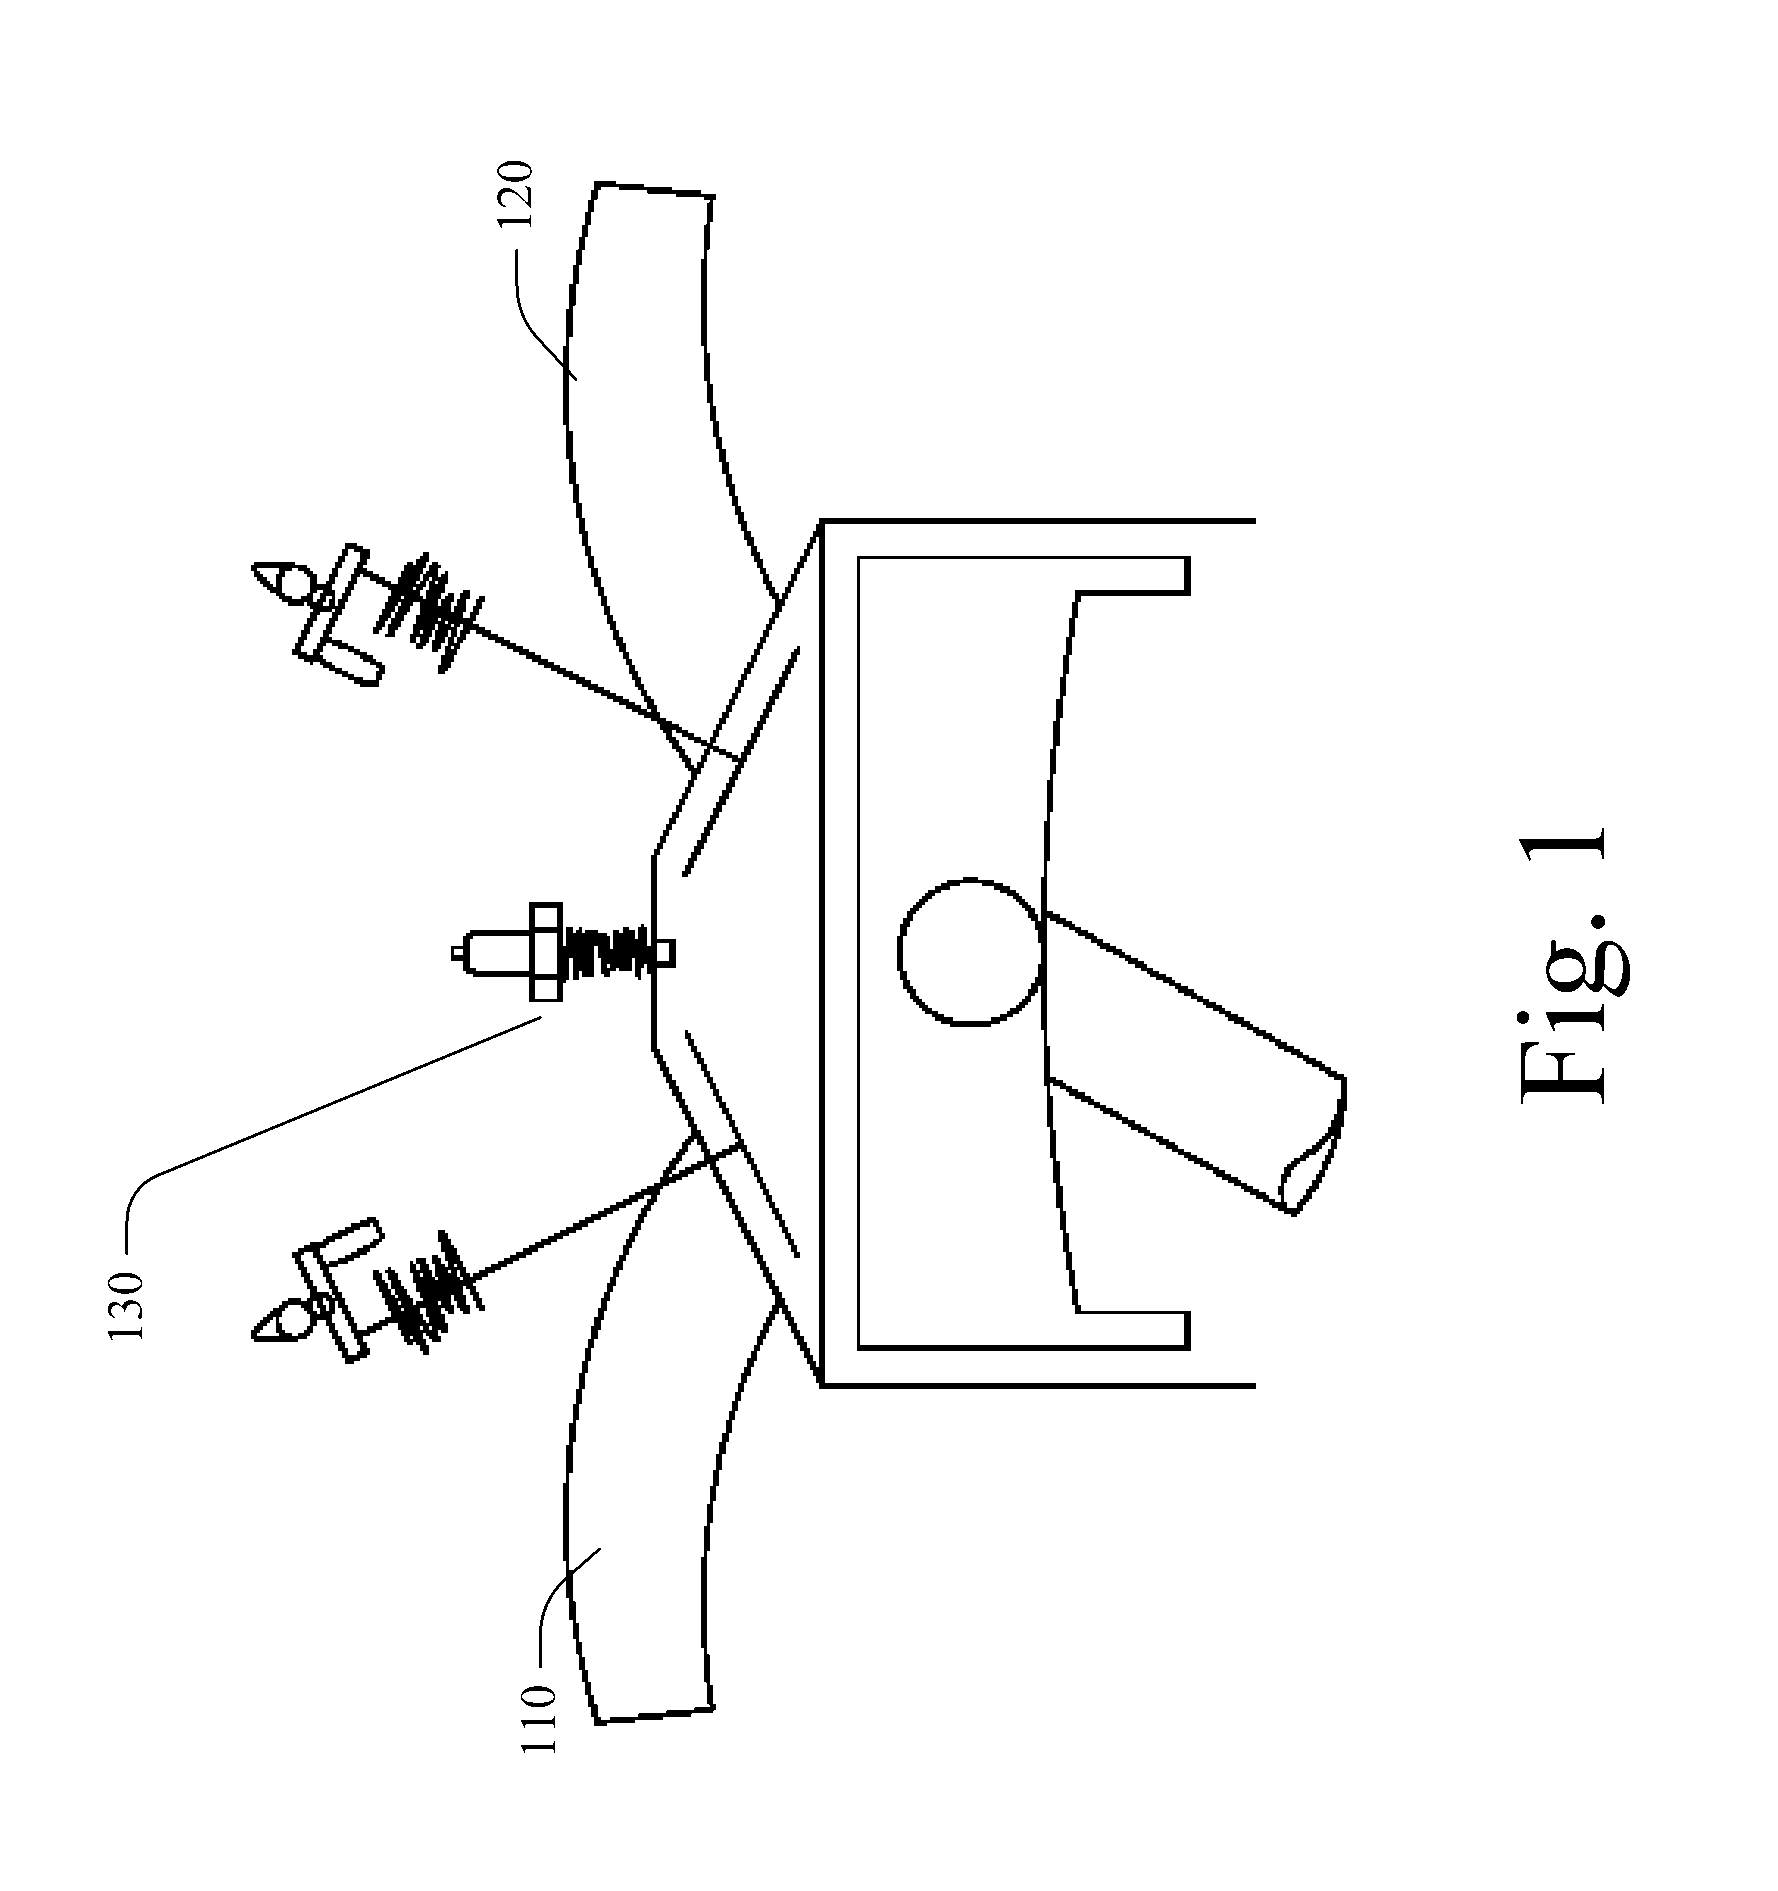 Internal combustion engine with modified shaft